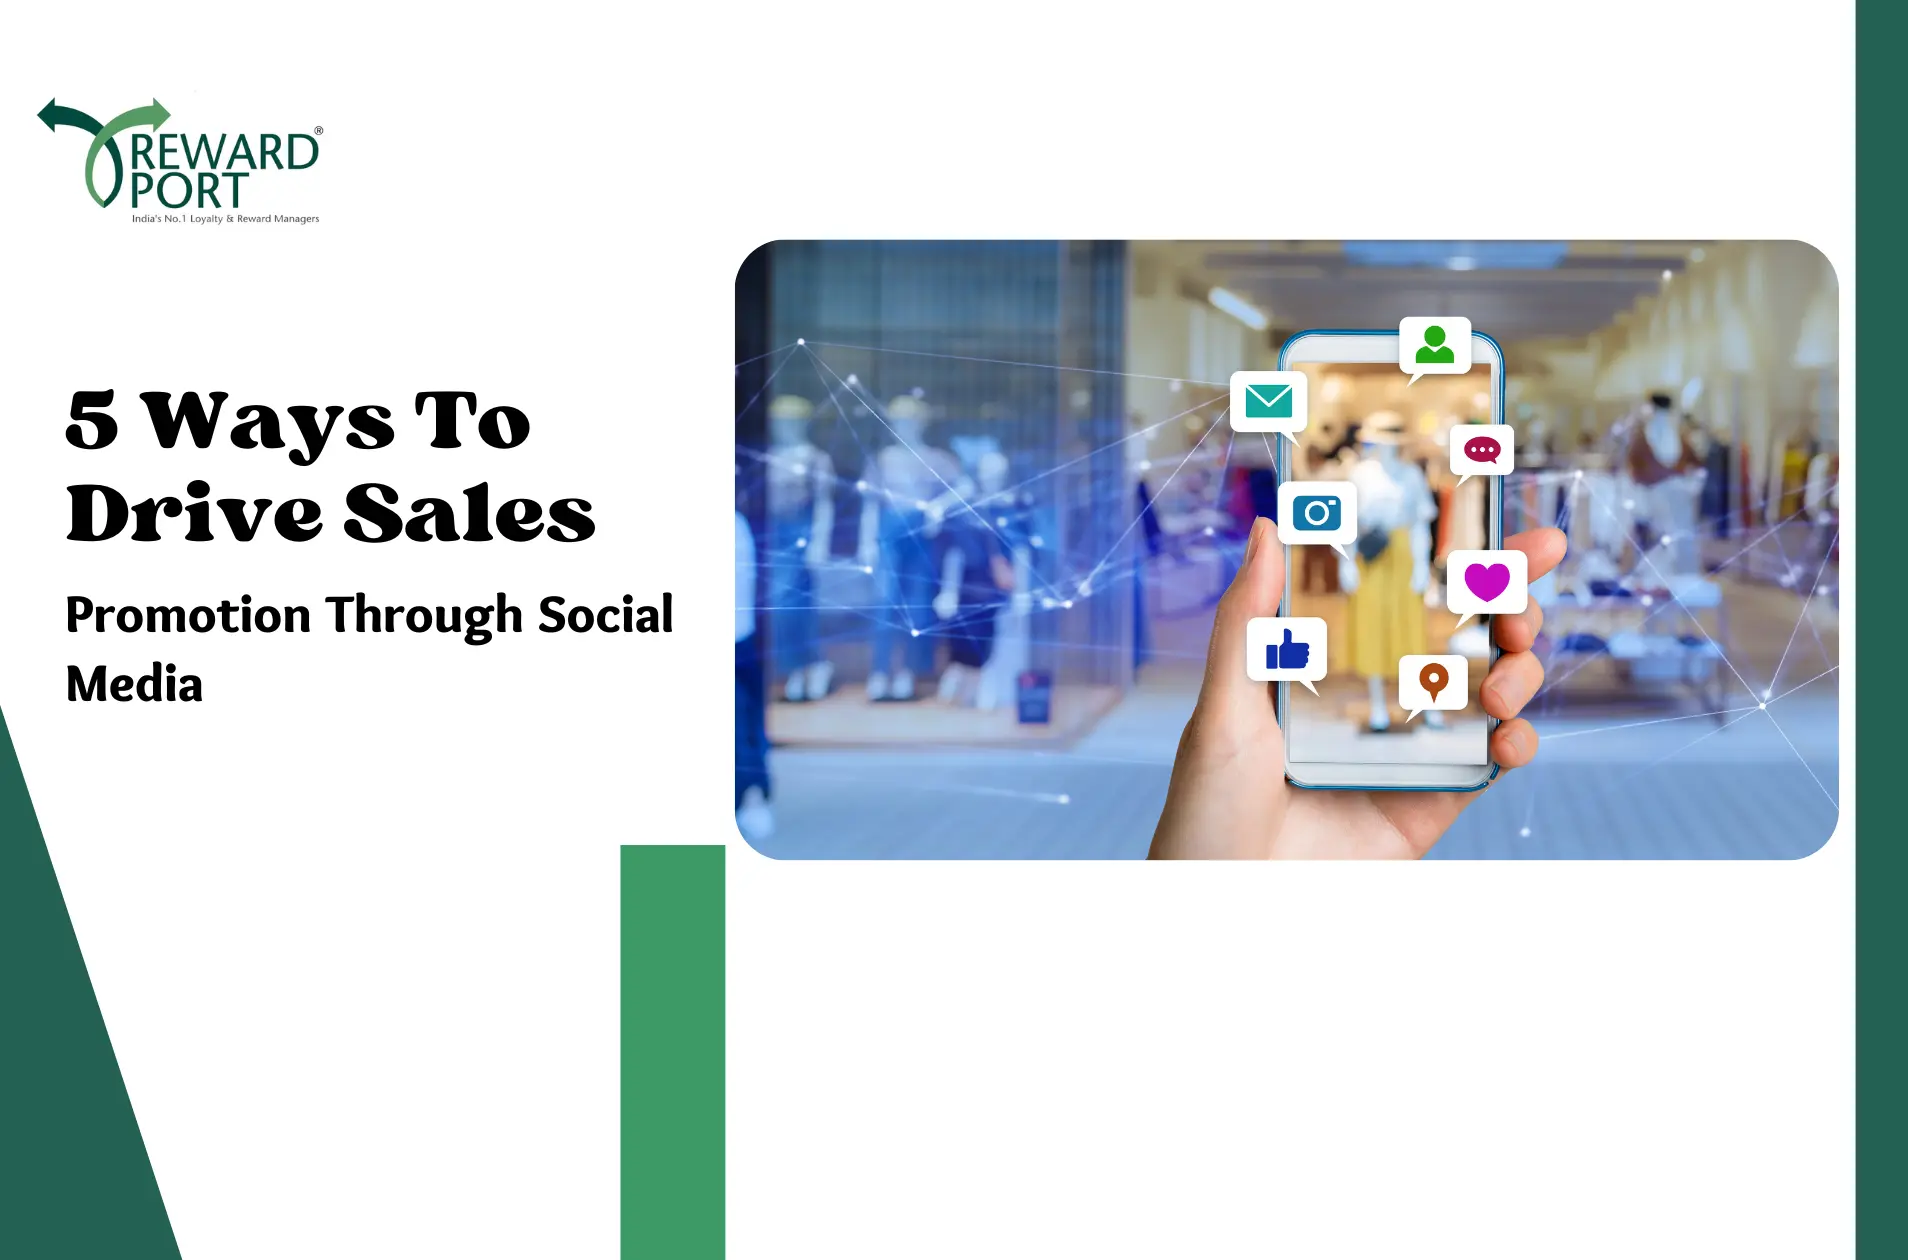 5 Ways To Drive Sales Promotion Through Social Media